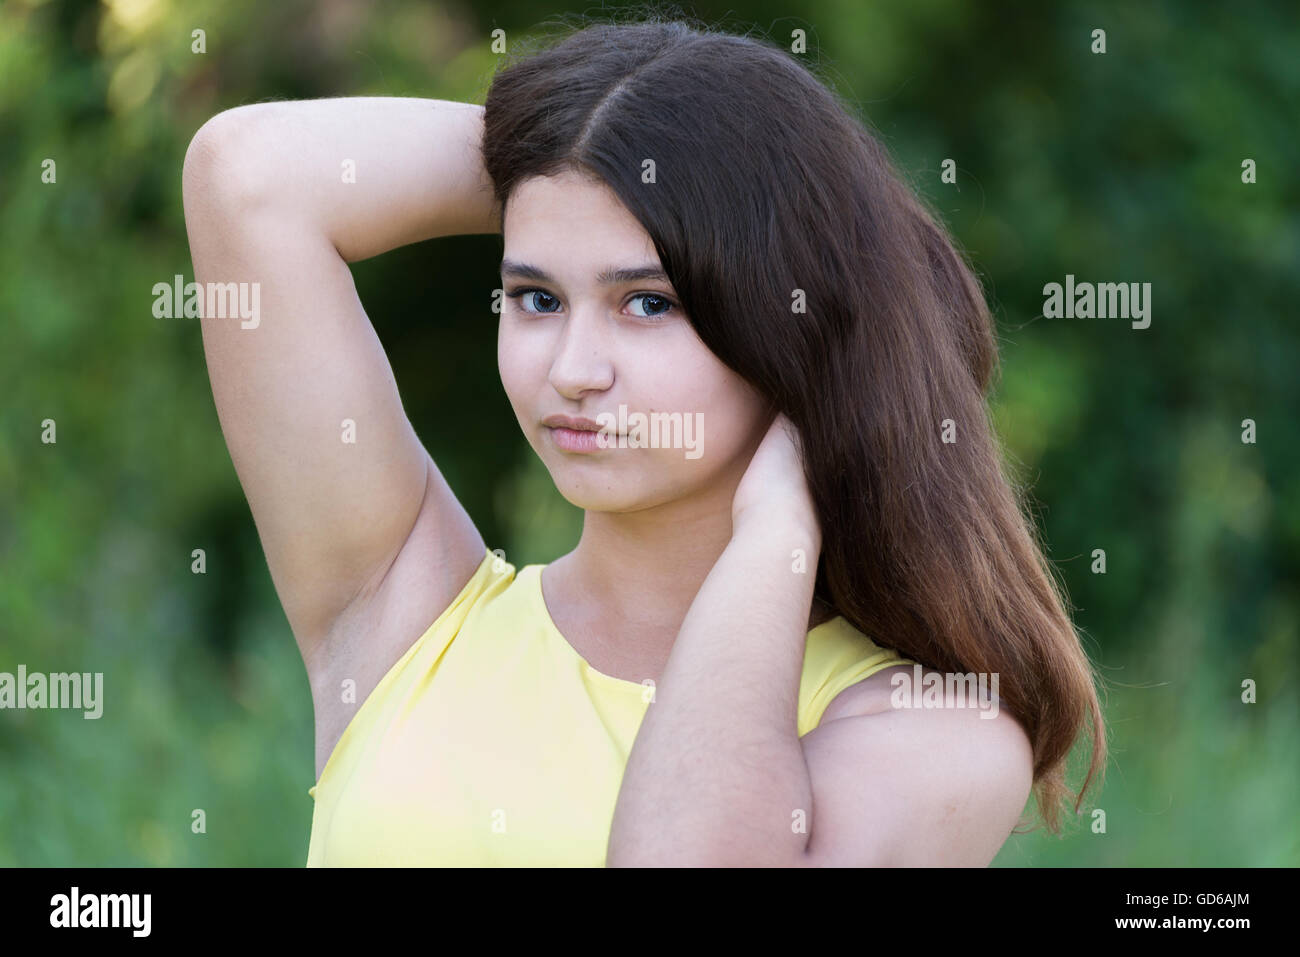 teen girl with beautiful hair in nature alone Stock Photo